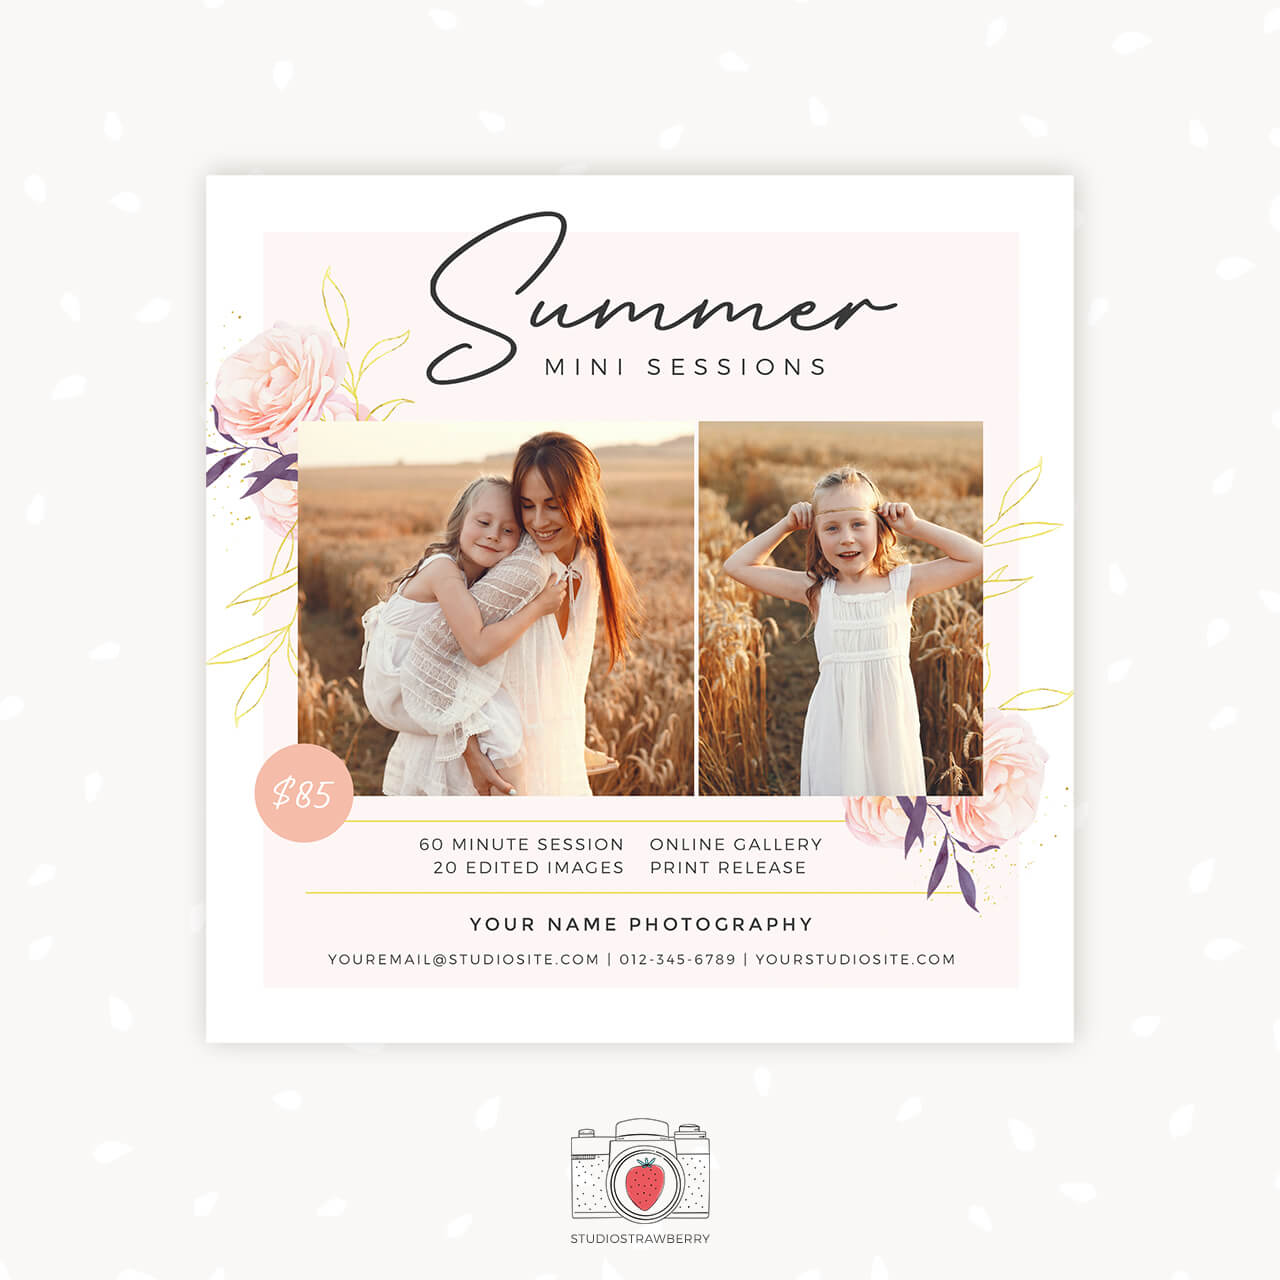 Summer mini sessions template